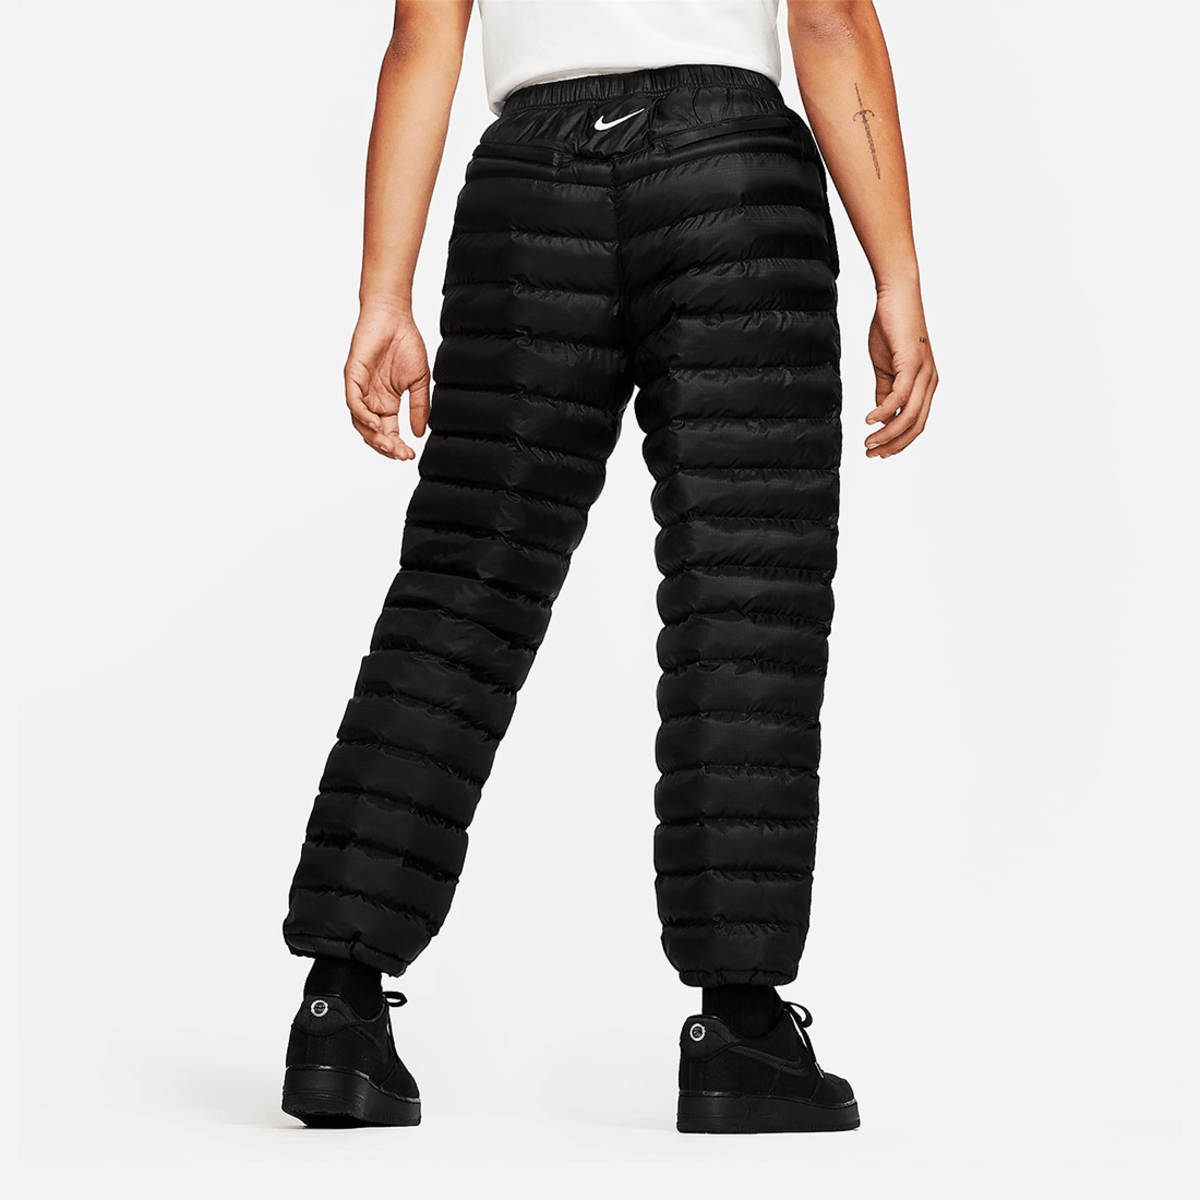 Nike x Stüssy Take on Cold Weather With New Insulated Pants - Airows